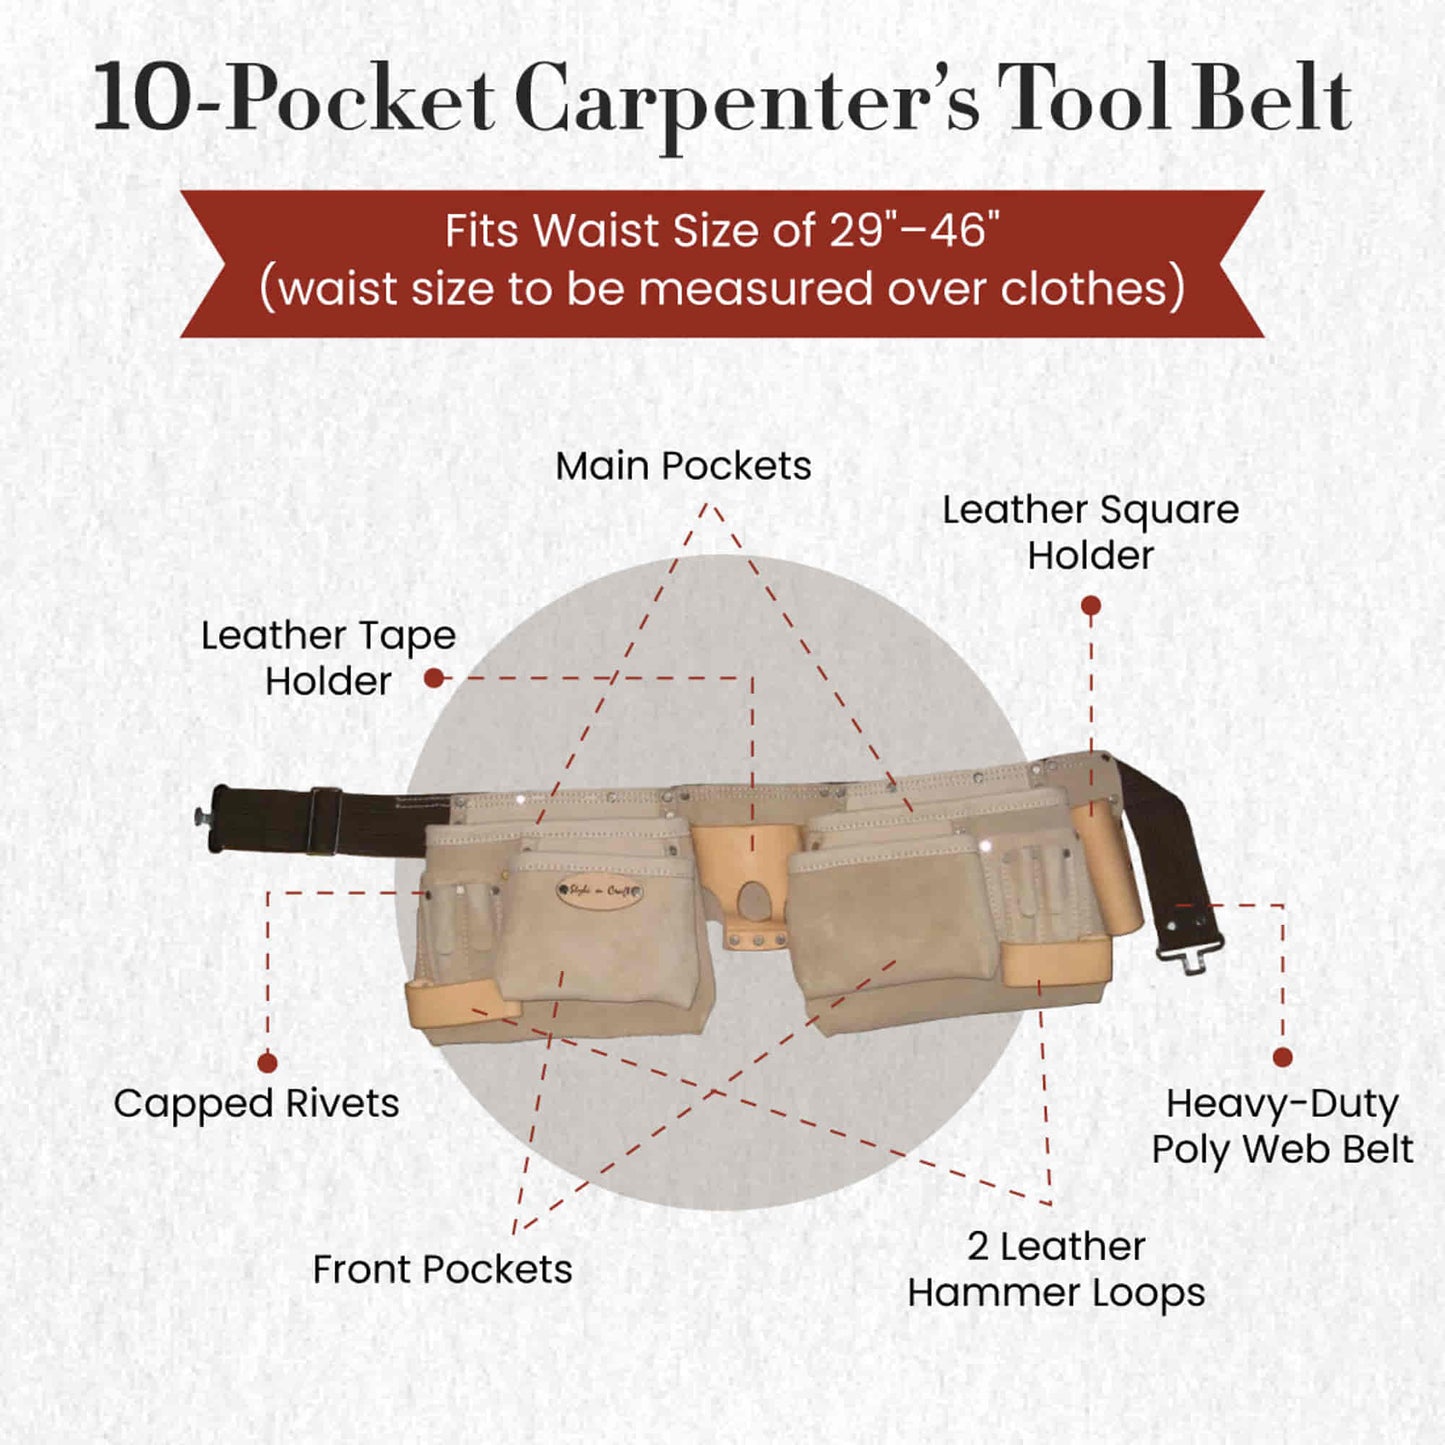 Style n Craft 92424 - 10 Pocket Carpenter's Tool Belt in Gray Full Grain Leather - Front View Showing the Details